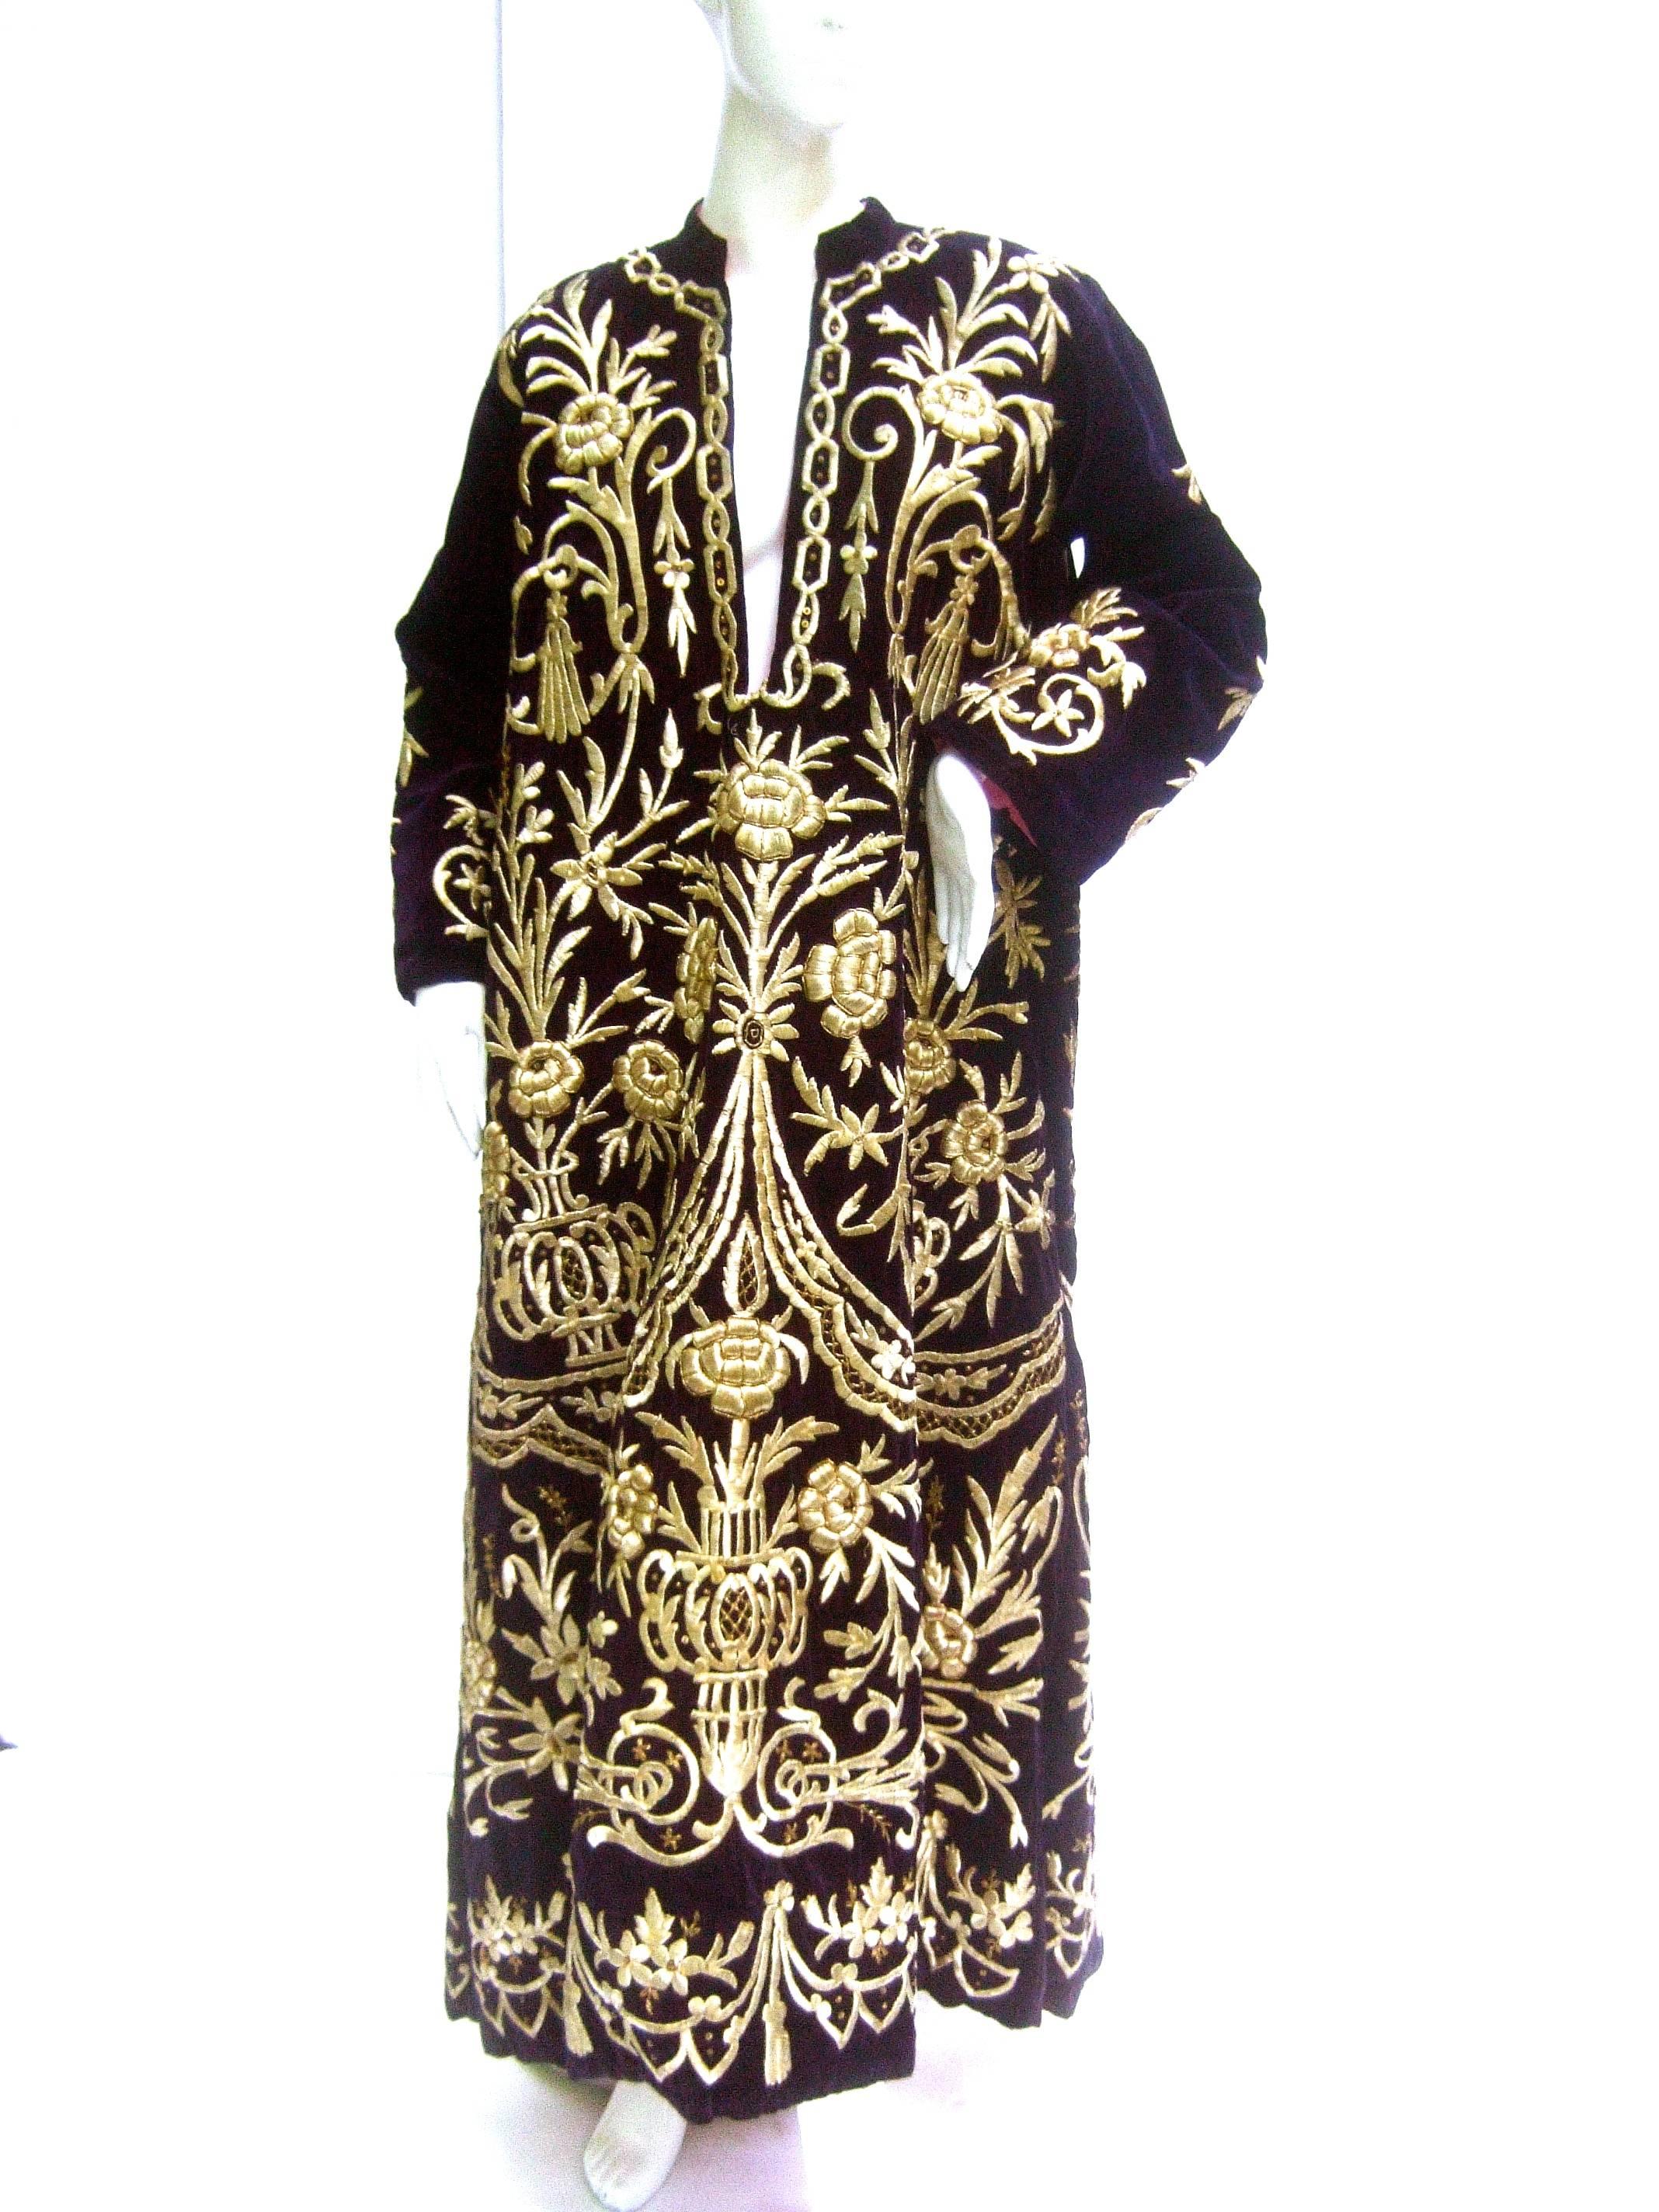 Exquisite museum worthy aubergene velvet embroidered metallic caftan 
The incredible caftan / robe is embellished with extraordinary three
dimensional gold metallic stumpwork embroidery throughout 

The mind blowing metallic hand embroidery is